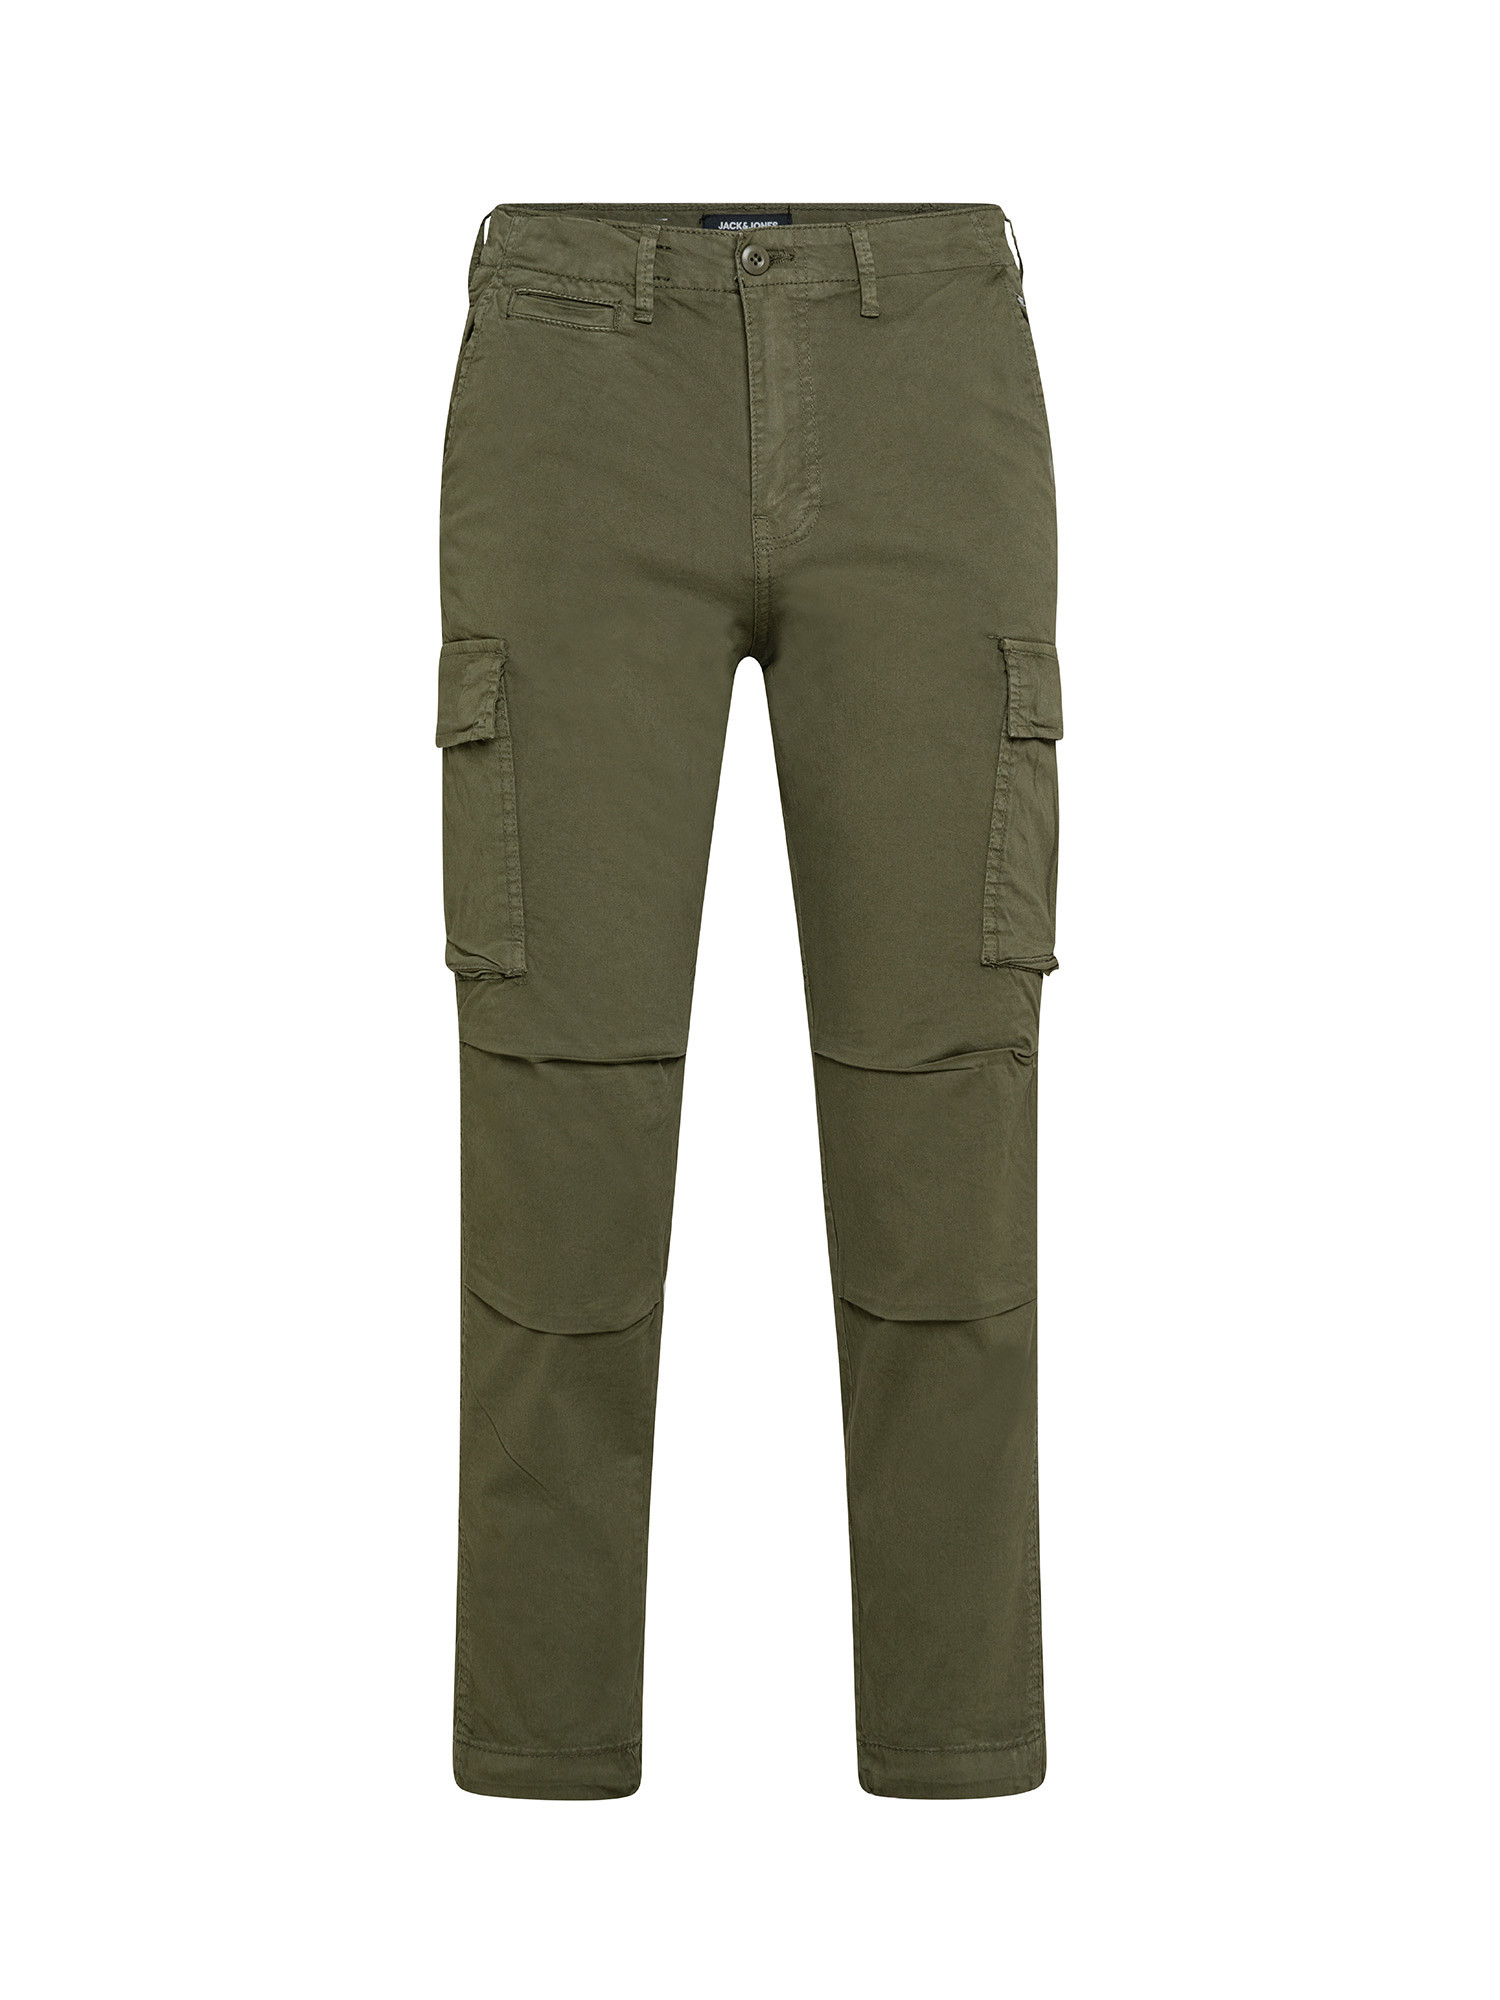 Pantaloni cargo con tasche laterali, Verde, large image number 0